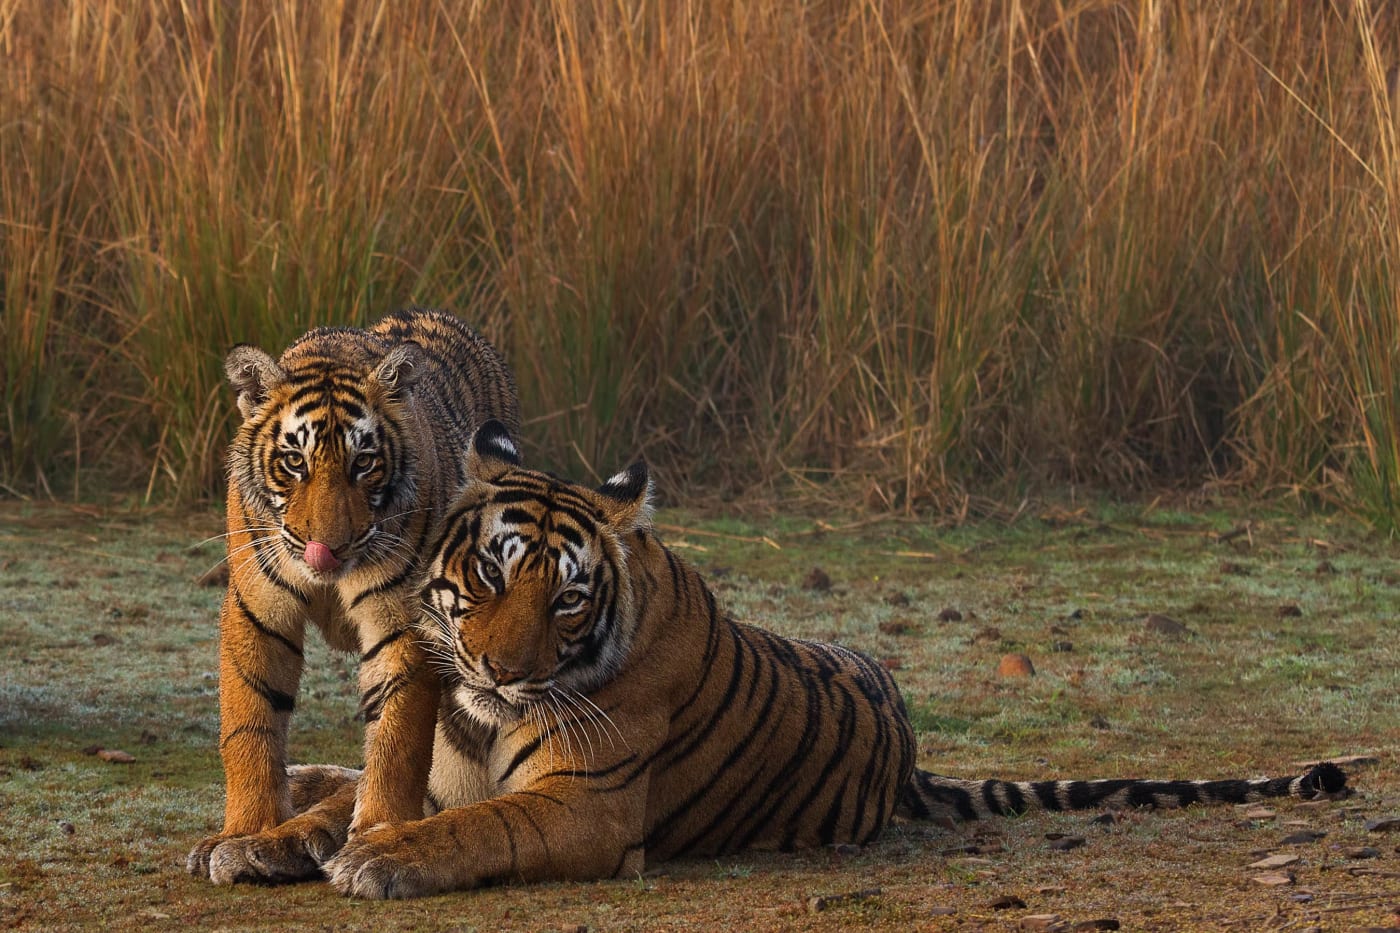 A mother tiger (Krishna, T-19) and her cub look at the camera with tall grass behind them. Ranthambore National Park, India